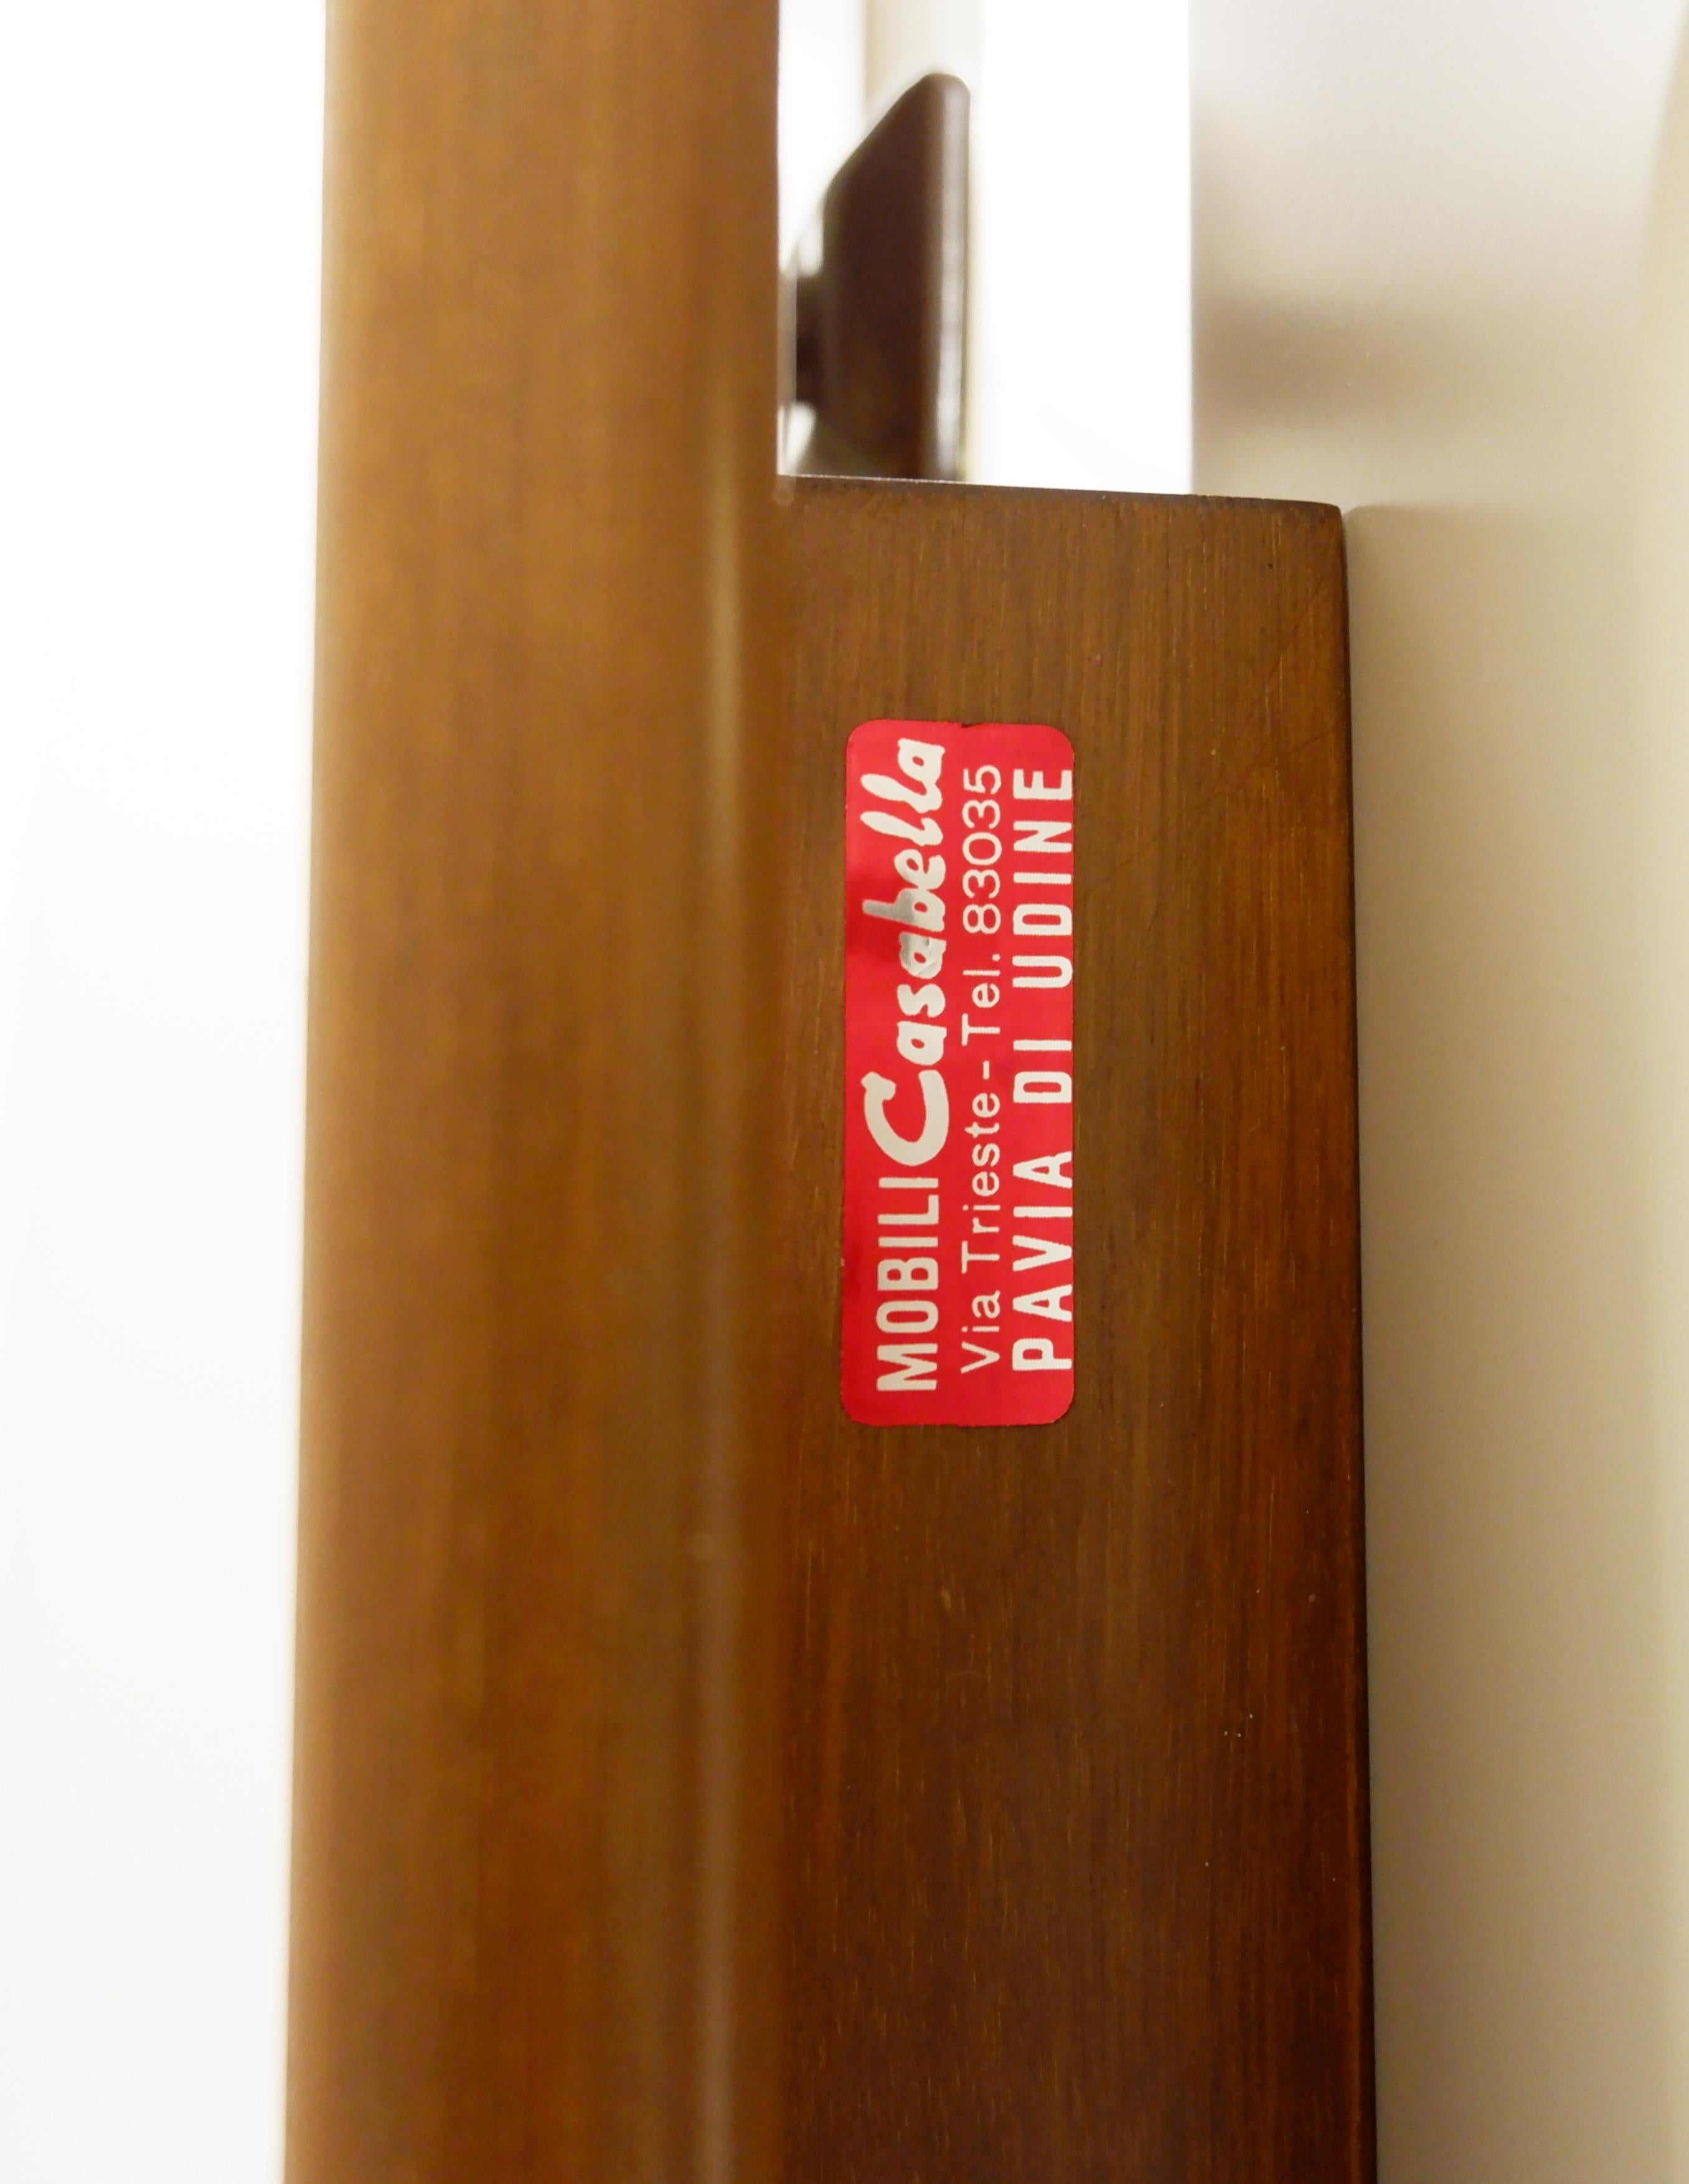 Mid-Century Modern Mid-century modern Coat Rack by Carlo di Carli for Fiarm - 1960s For Sale